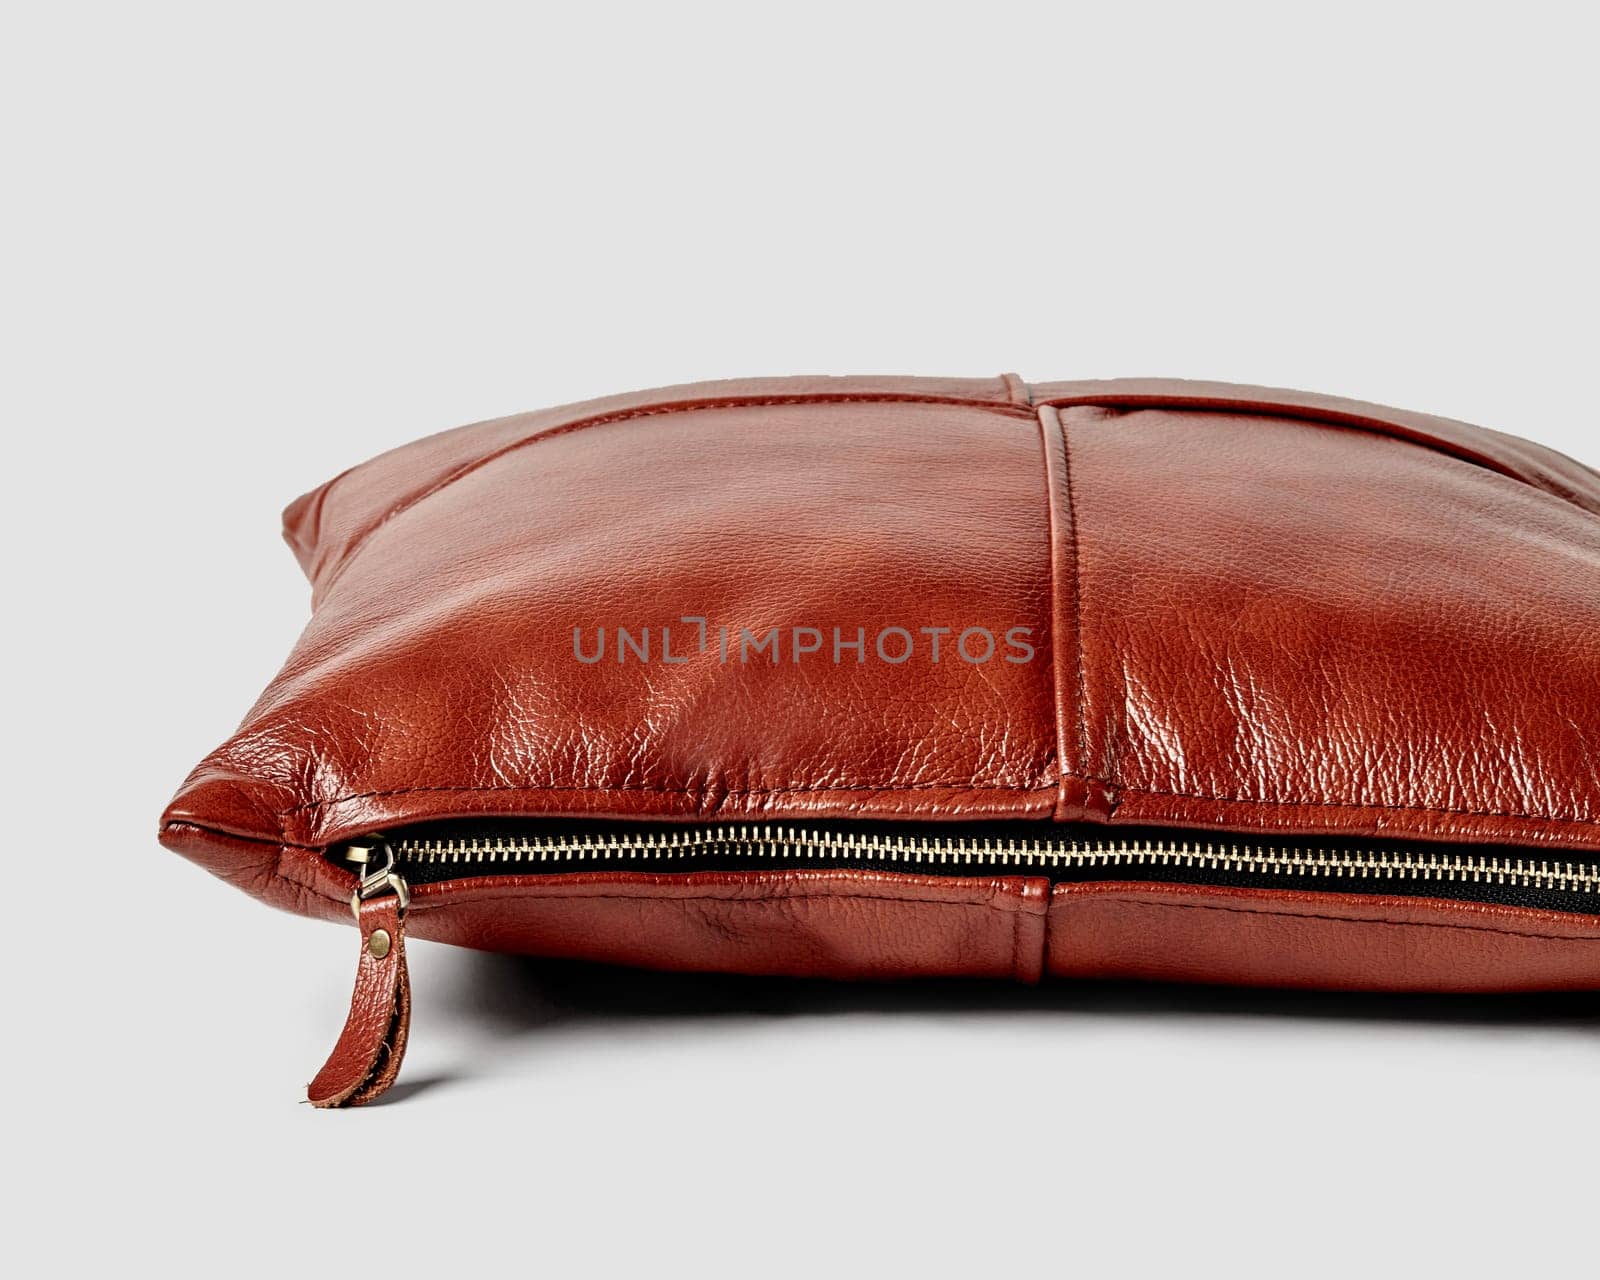 Closeup of brown leather cushion with metal gold side zipper and pull detail adding functional elegance to piece. Handcrafted accessory for cozy interior design